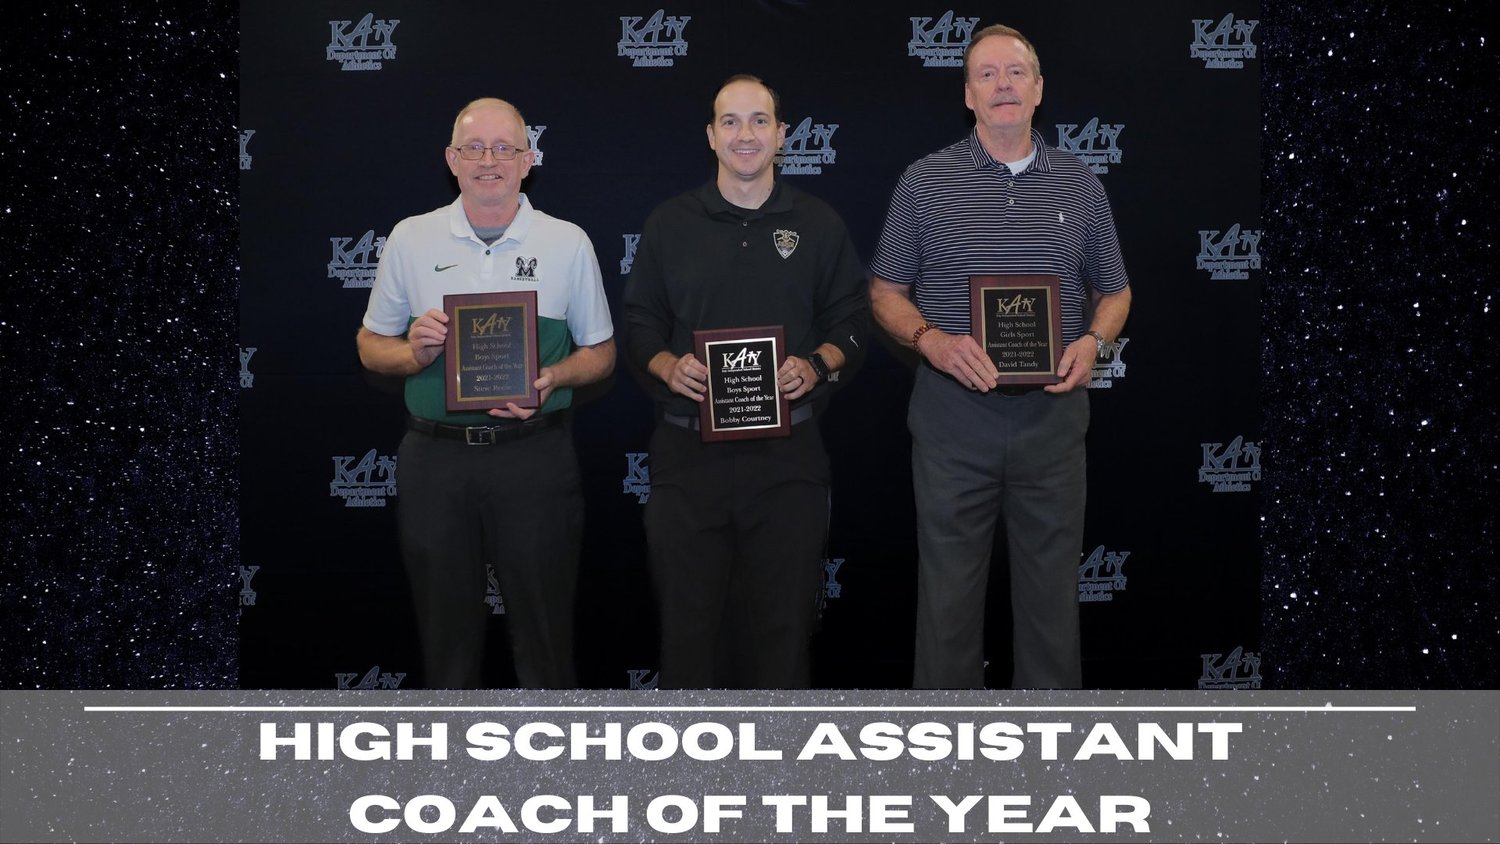 Mayde Creek’s Steve Reese, Jordan’s Bobby Courtney, Seven Lakes David Tandy and Mayde Creek’s Sedalia Ellis were named Assistant Coaches of the Year.